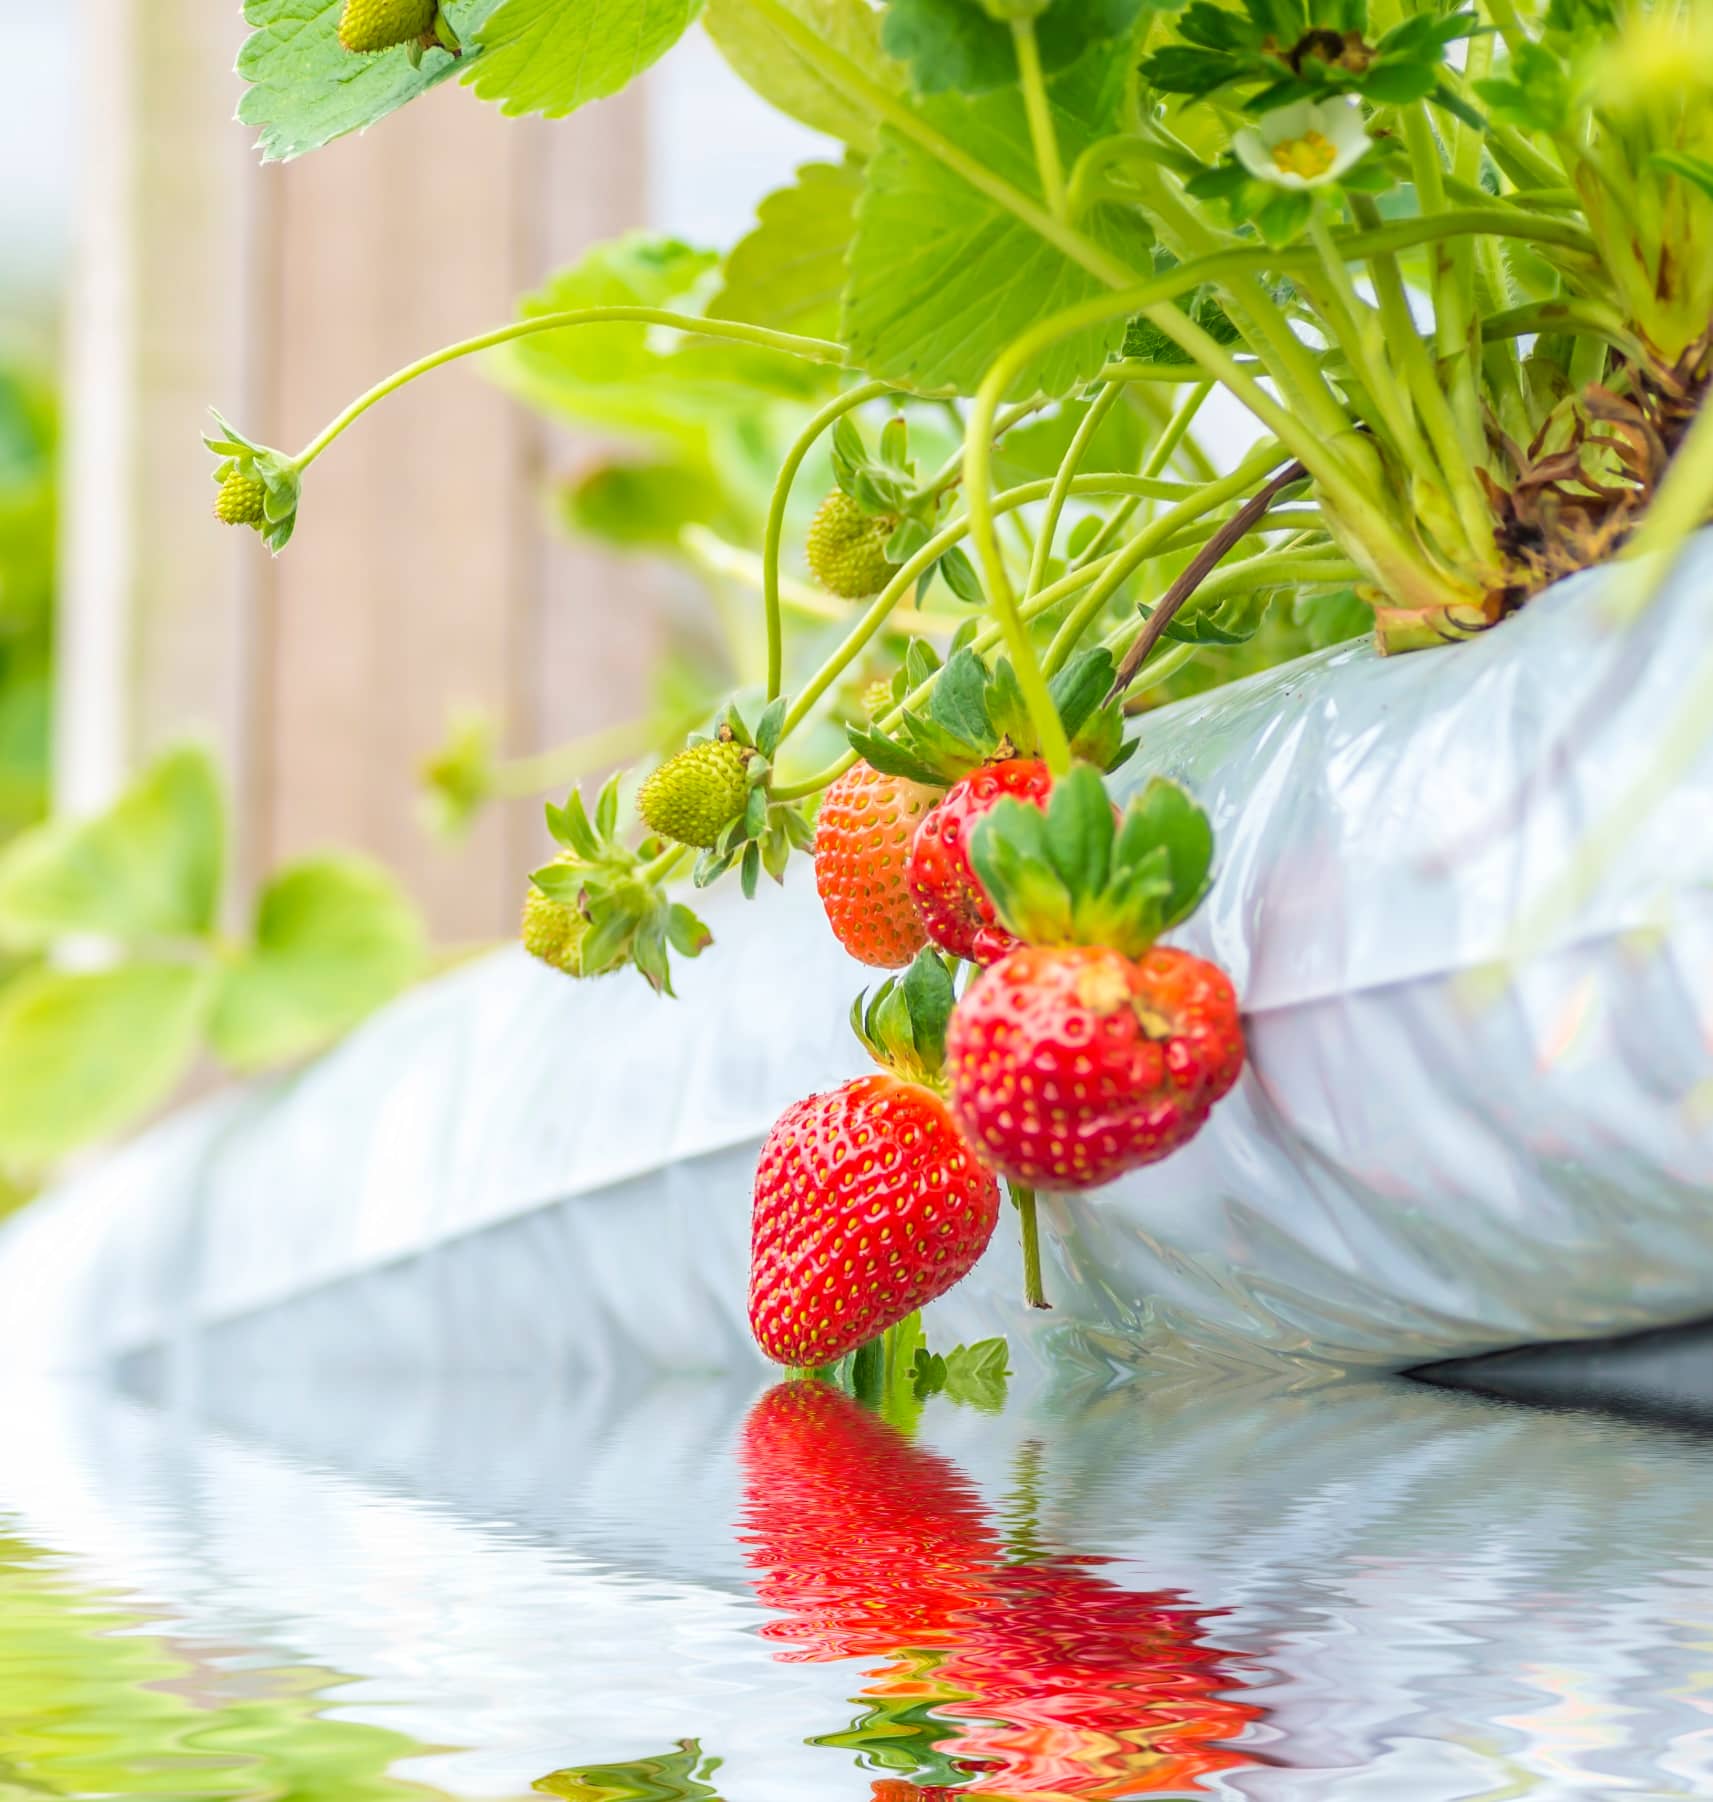 Best Hydroponic System – Buying Guide & Recommendations